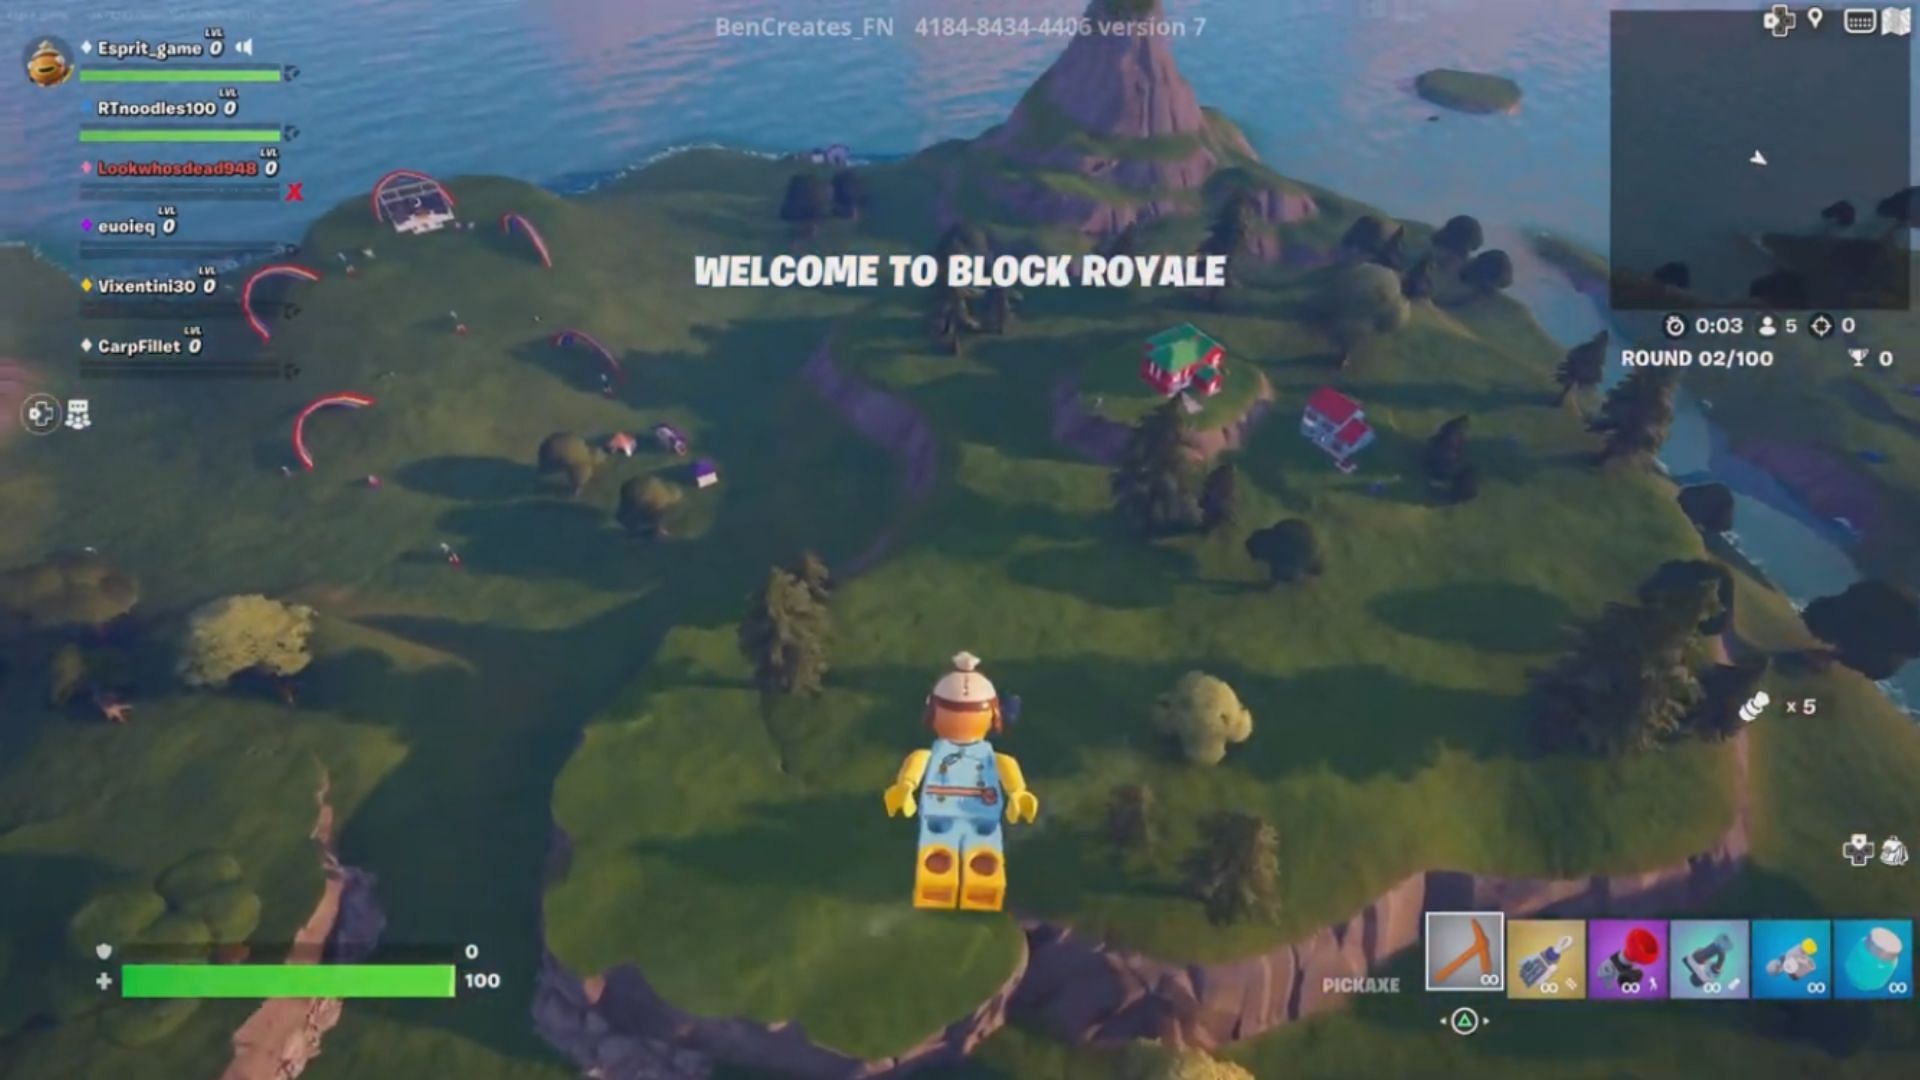 The Block Royale experience features a massive map (Image via ESPIRITGAME on YouTube)